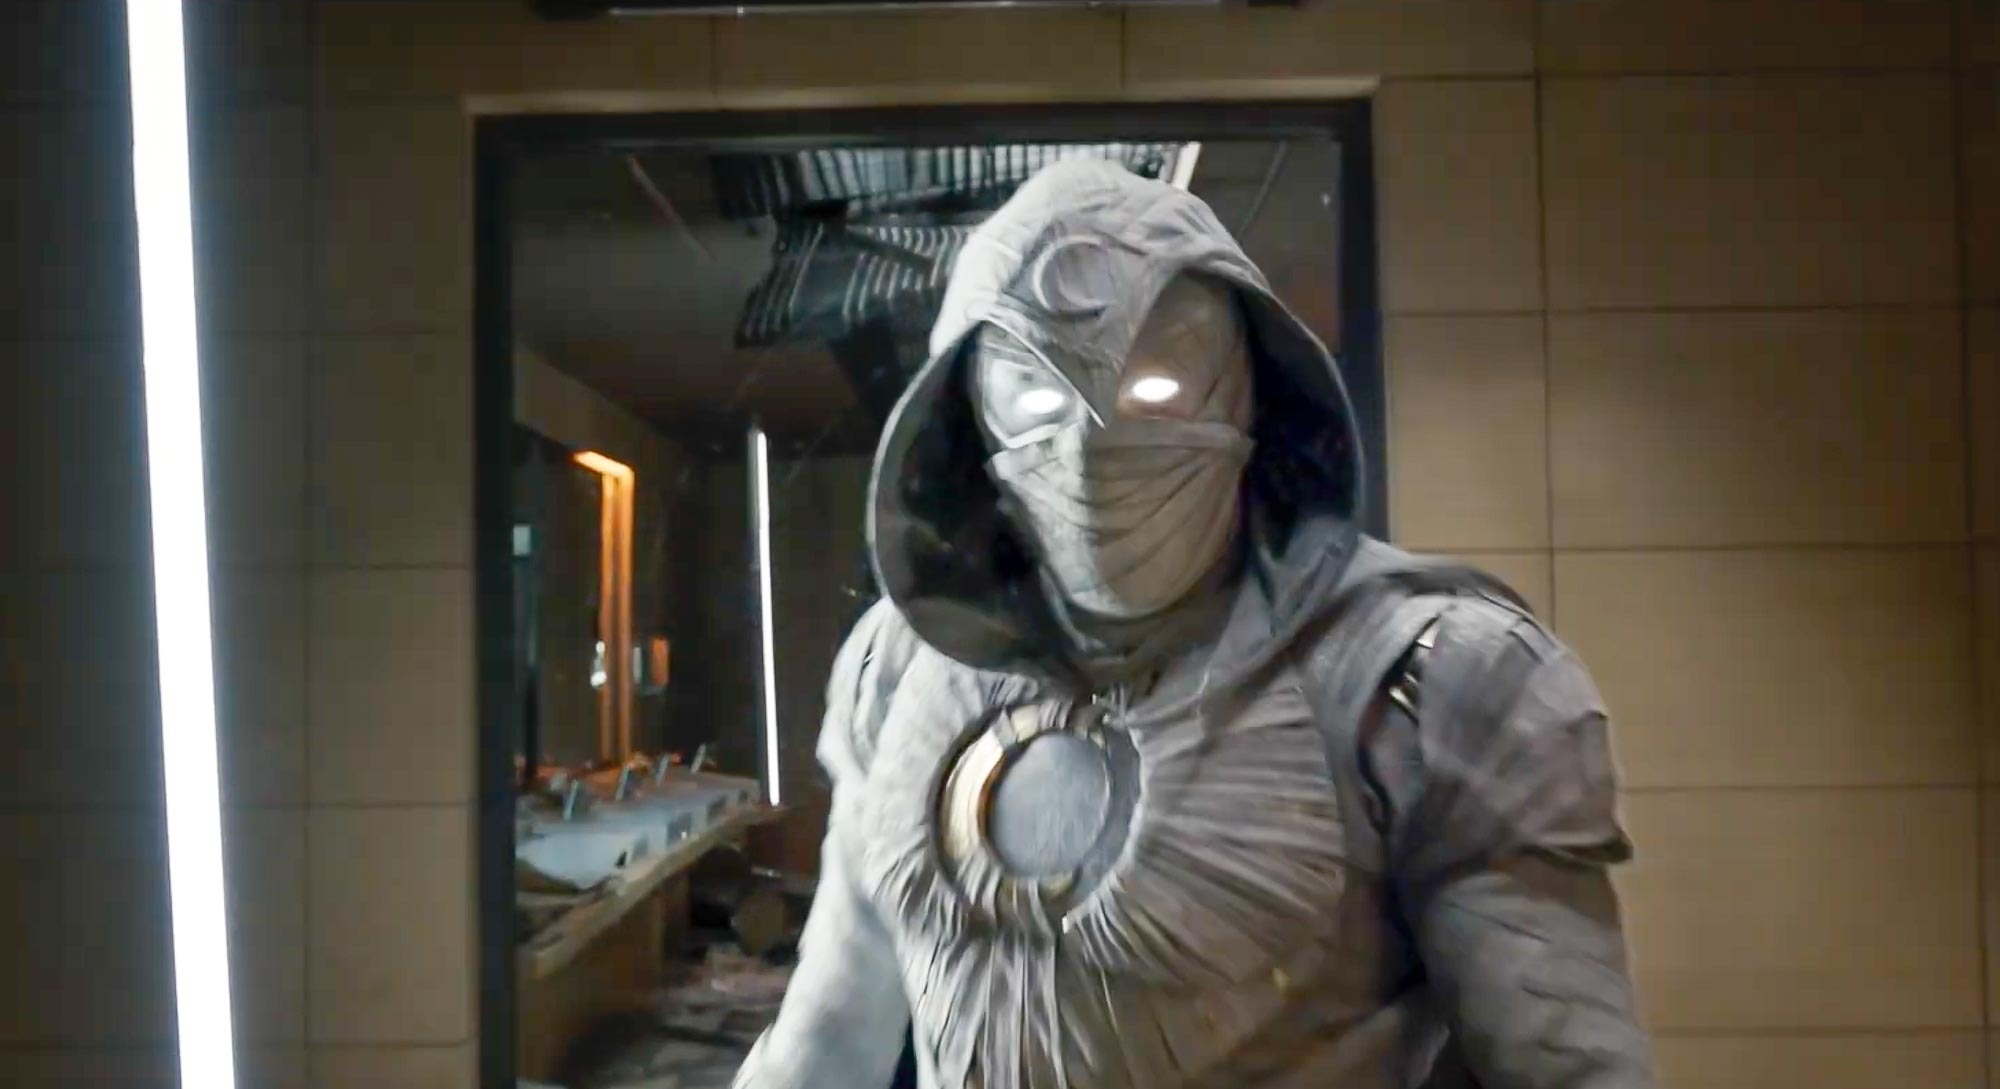 Trailer Released for Season Finale of 'Moon Knight' on Disney+ - WDW News  Today